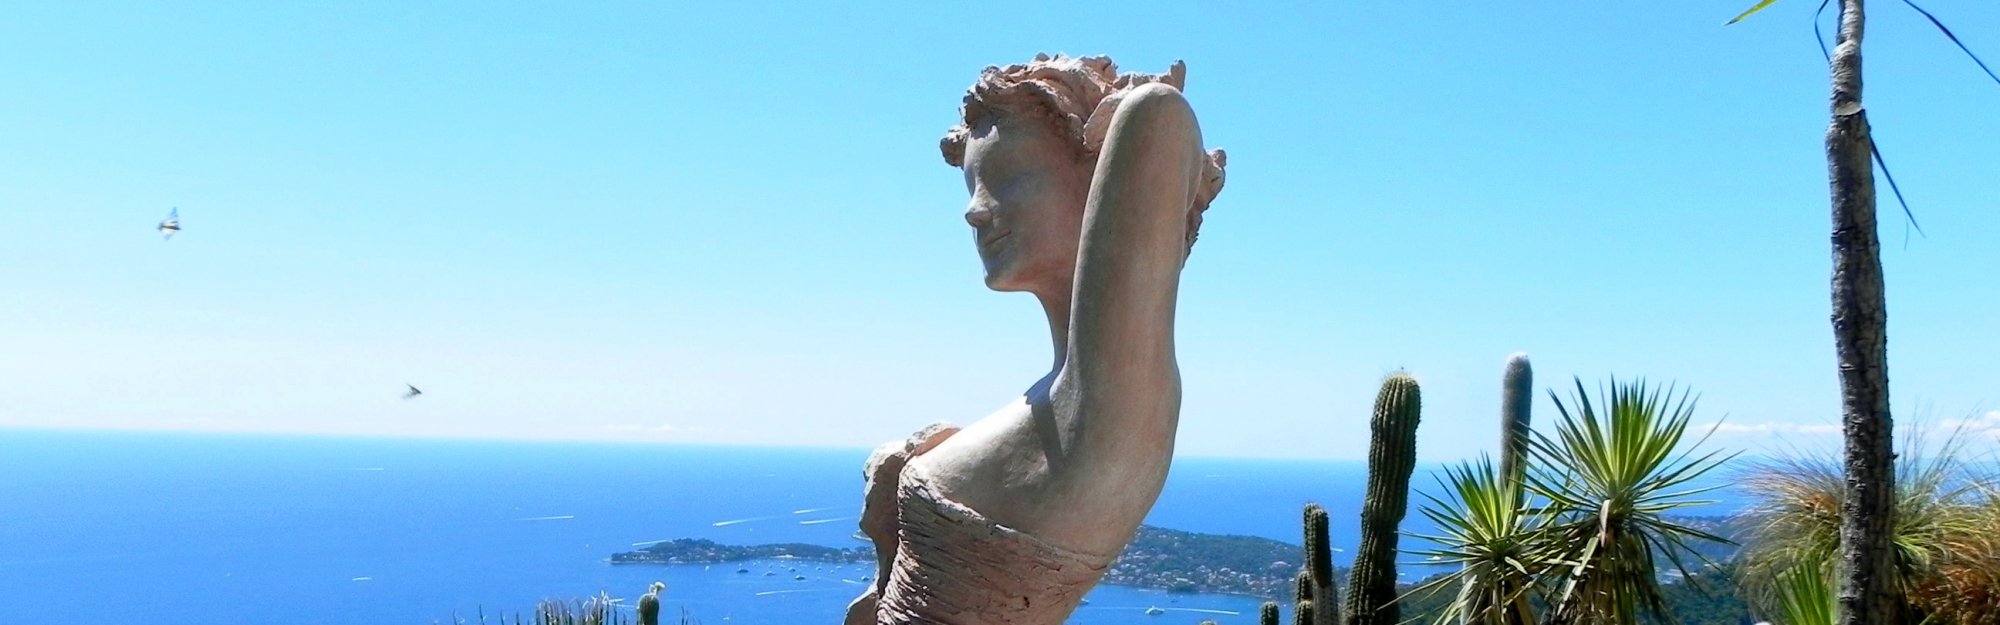 From Eze tropical gardens - 10 days in french riviera and provence